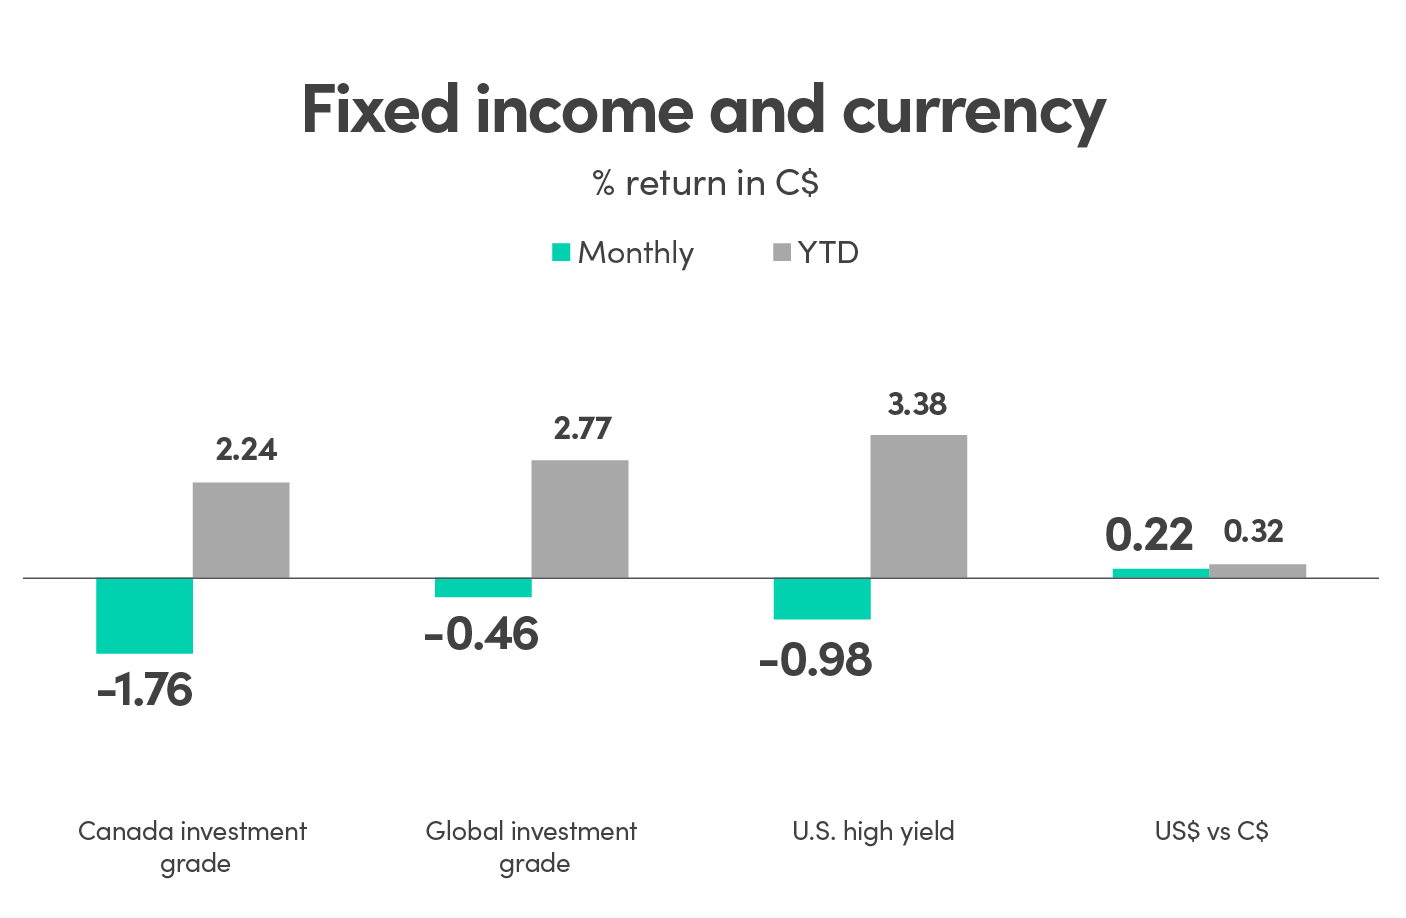 Bar graph showing % return in CAD (C$) for fixed income and currency. Canada investment grade monthly return is -1.76% and YTD is 2.24%. Global investment grade monthly return is -0.46% and YTD is 2.77%. US high yield monthly return is -0.98% and YTD is 3.38%. US$ vs C$ monthly return is 0.22% and YTD is 0.32%